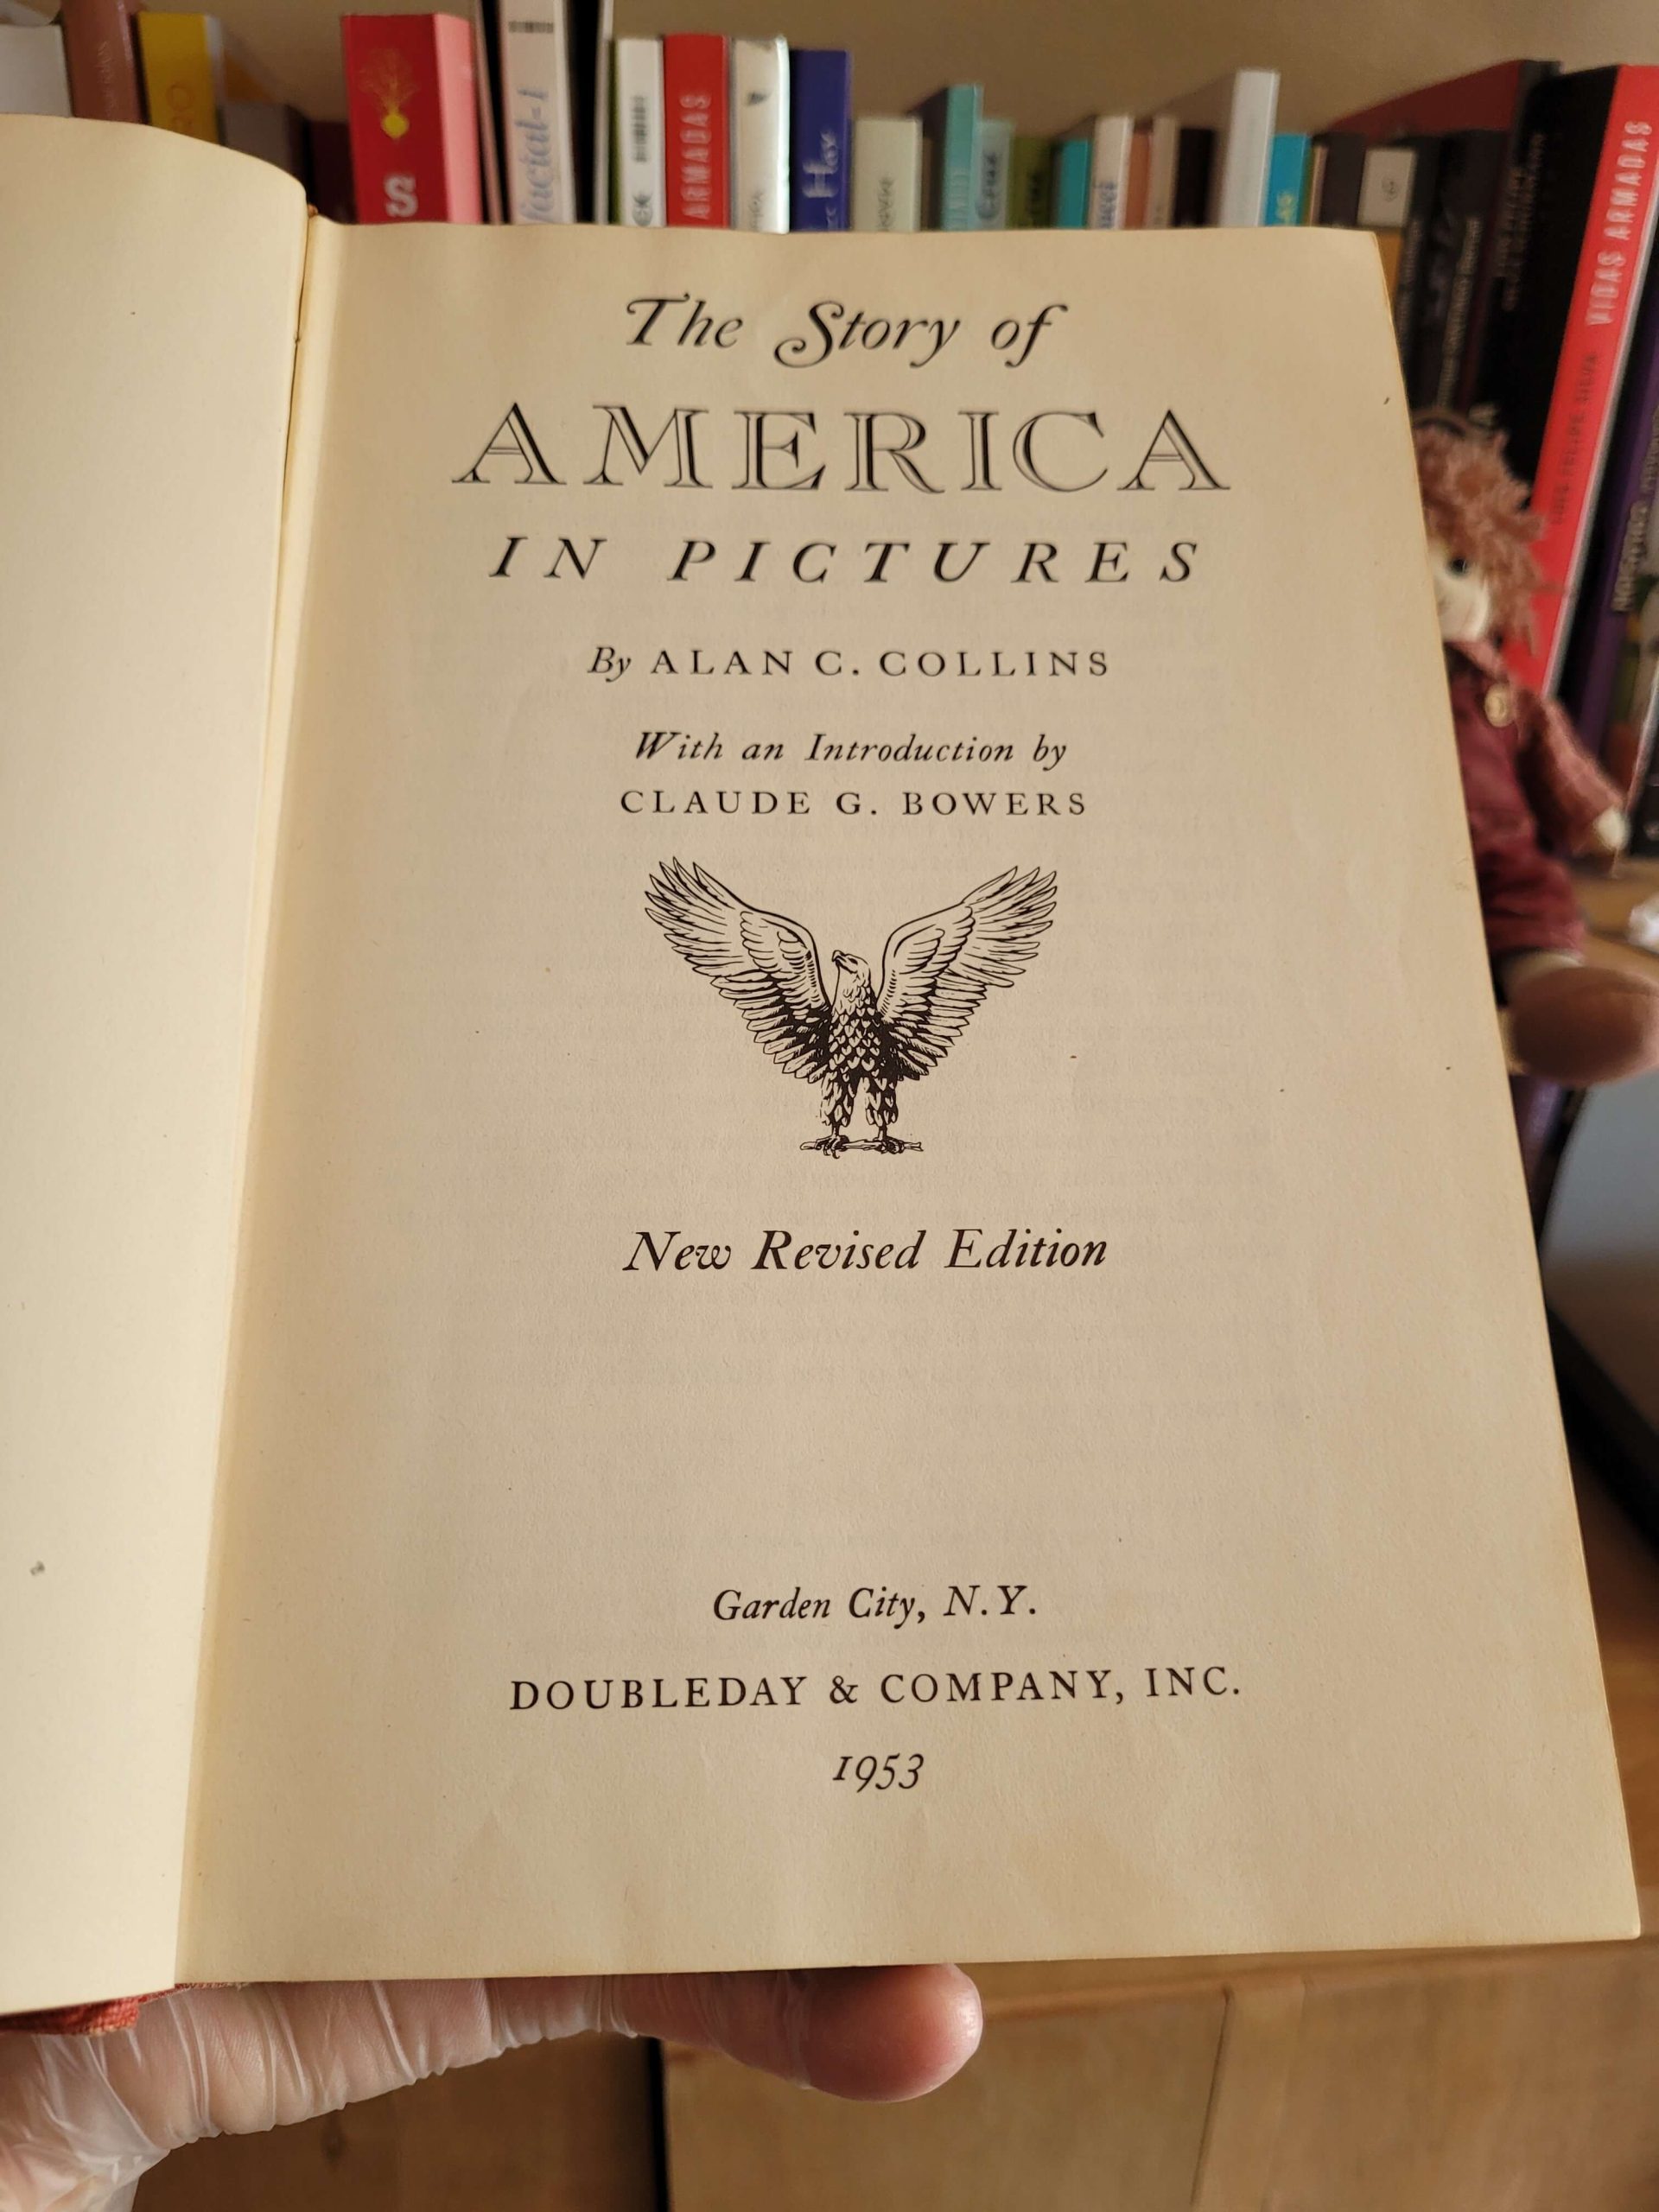 (1953) The Story of America in Pictures (Alan C. Collins)